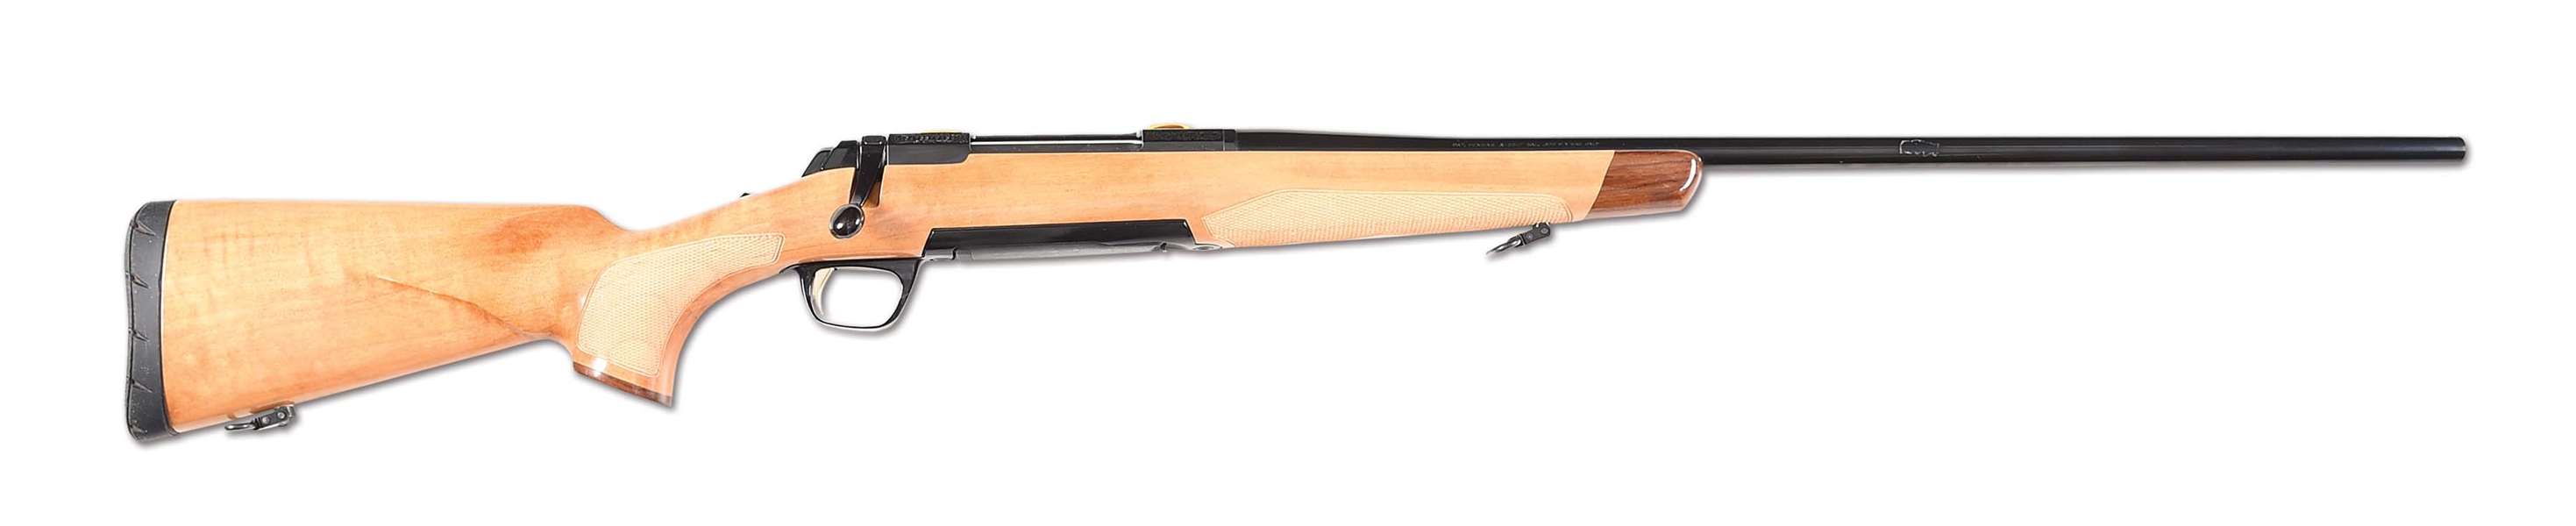 (M) BROWNING X BOLT MEDALLION BOLT ACTION RIFLE IN .300 WIN MAG.